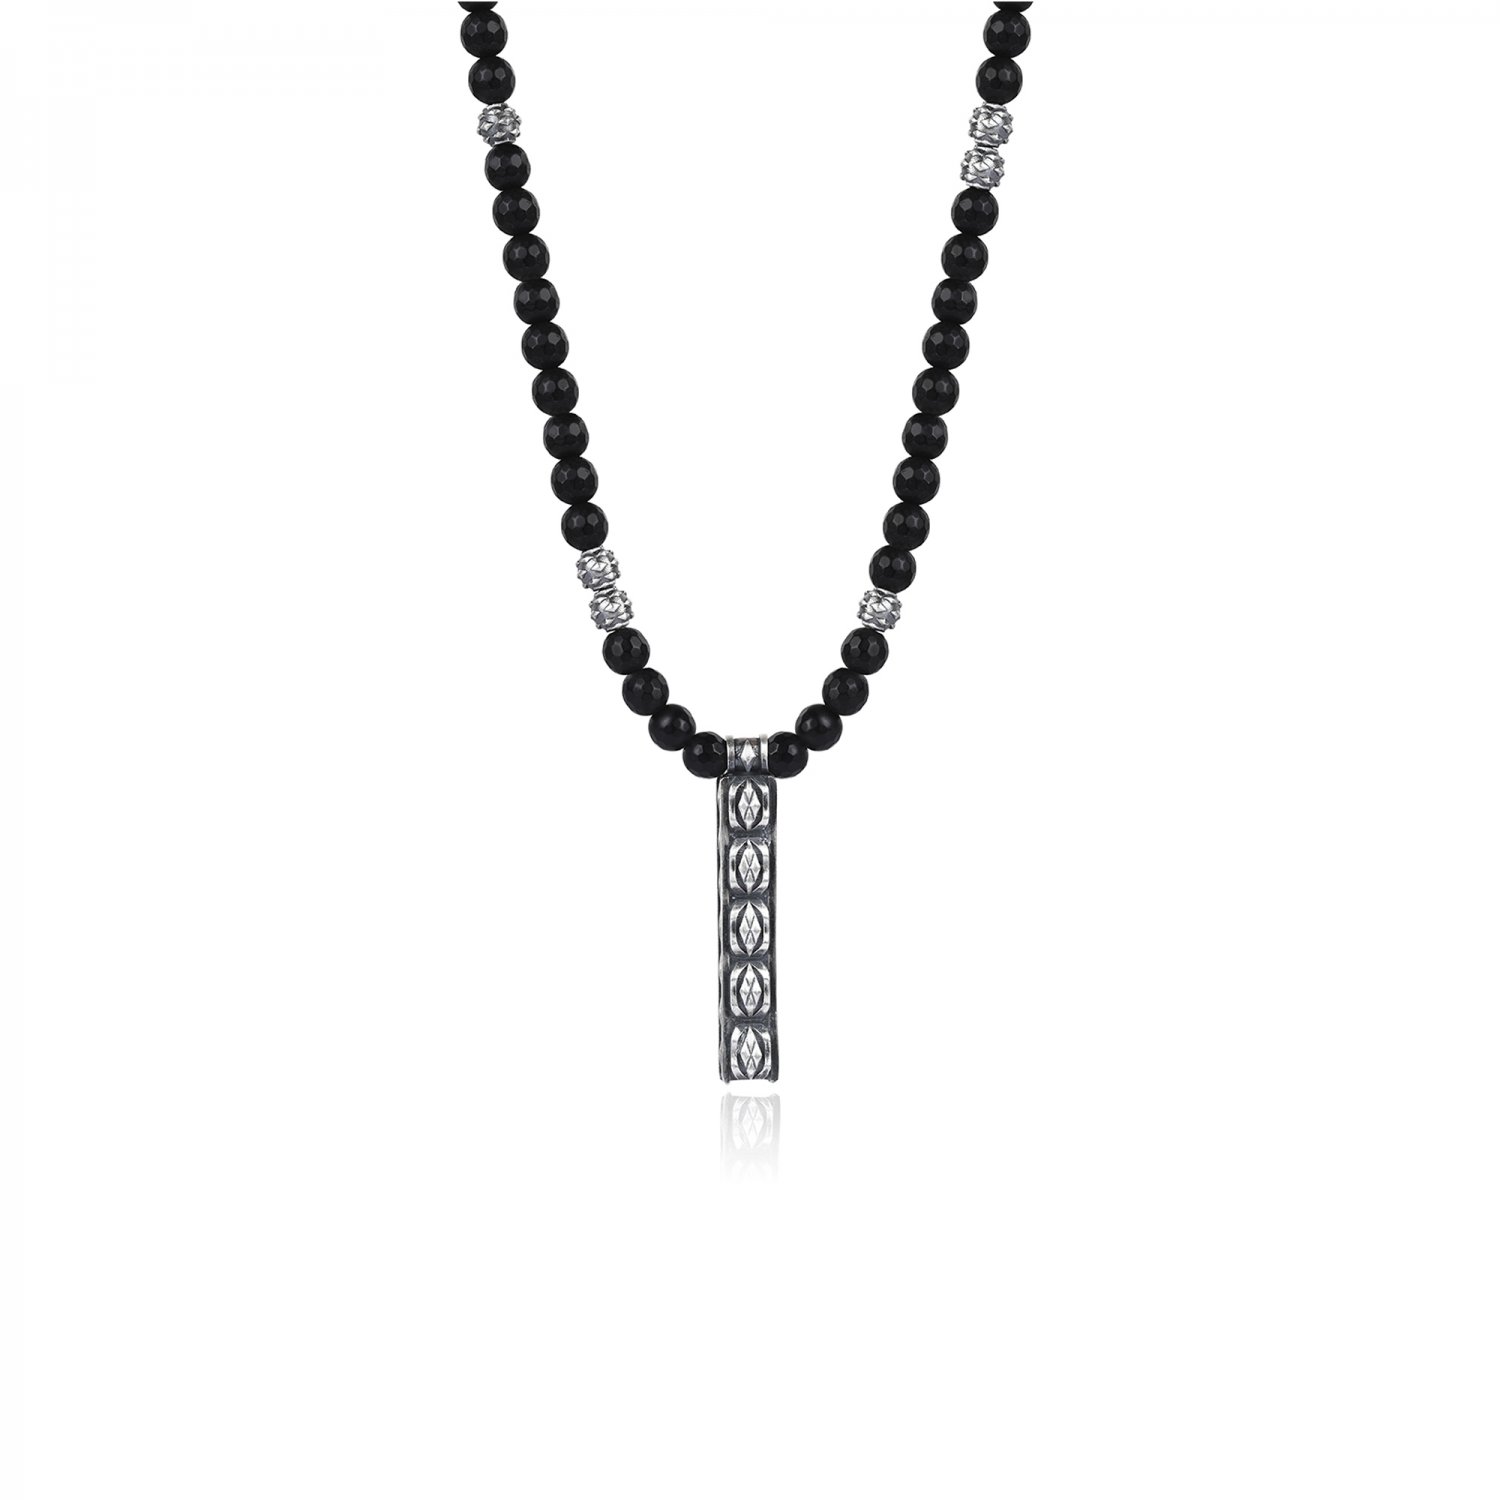 Cubic Style Beads Necklace with Black Frosted Agate